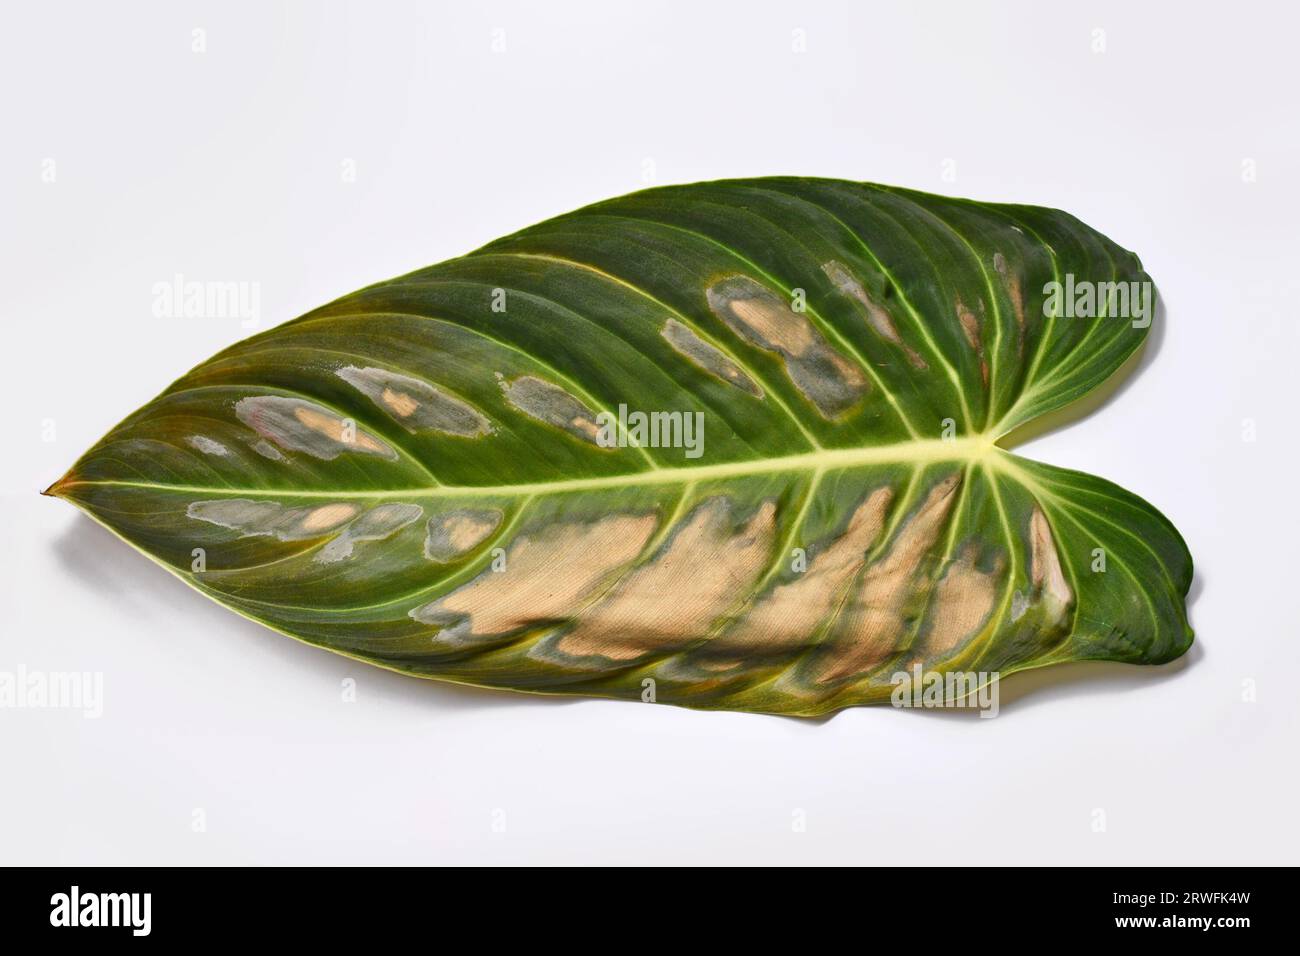 Dark and dried spots caused by sunborn on houseplant leaf of Philodendron plant Stock Photo